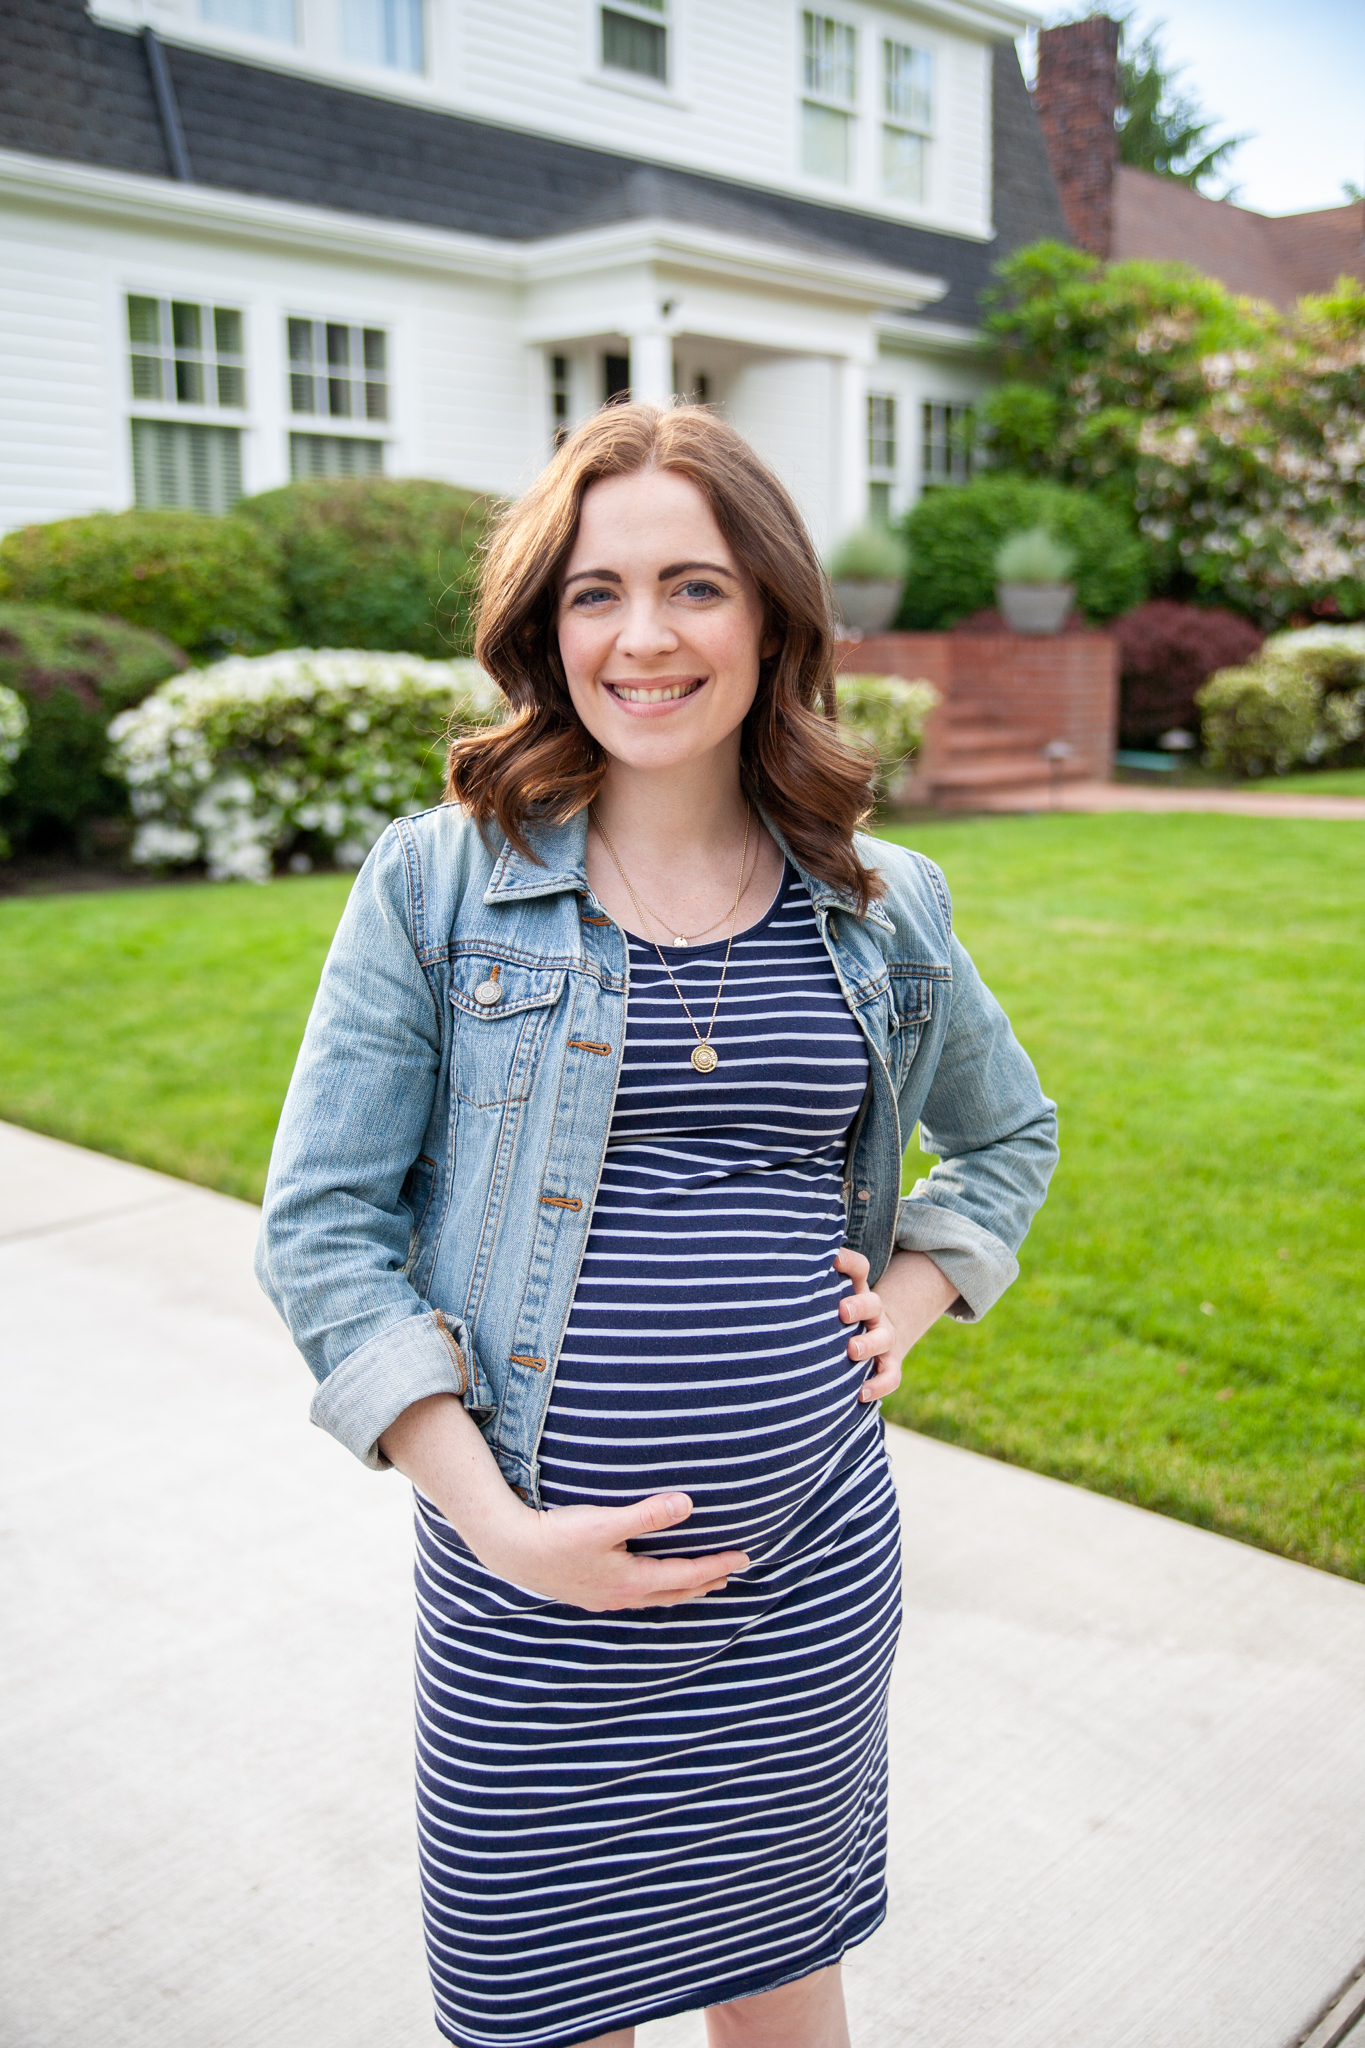 Pregnancy Style: What to wear in your 2nd trimester